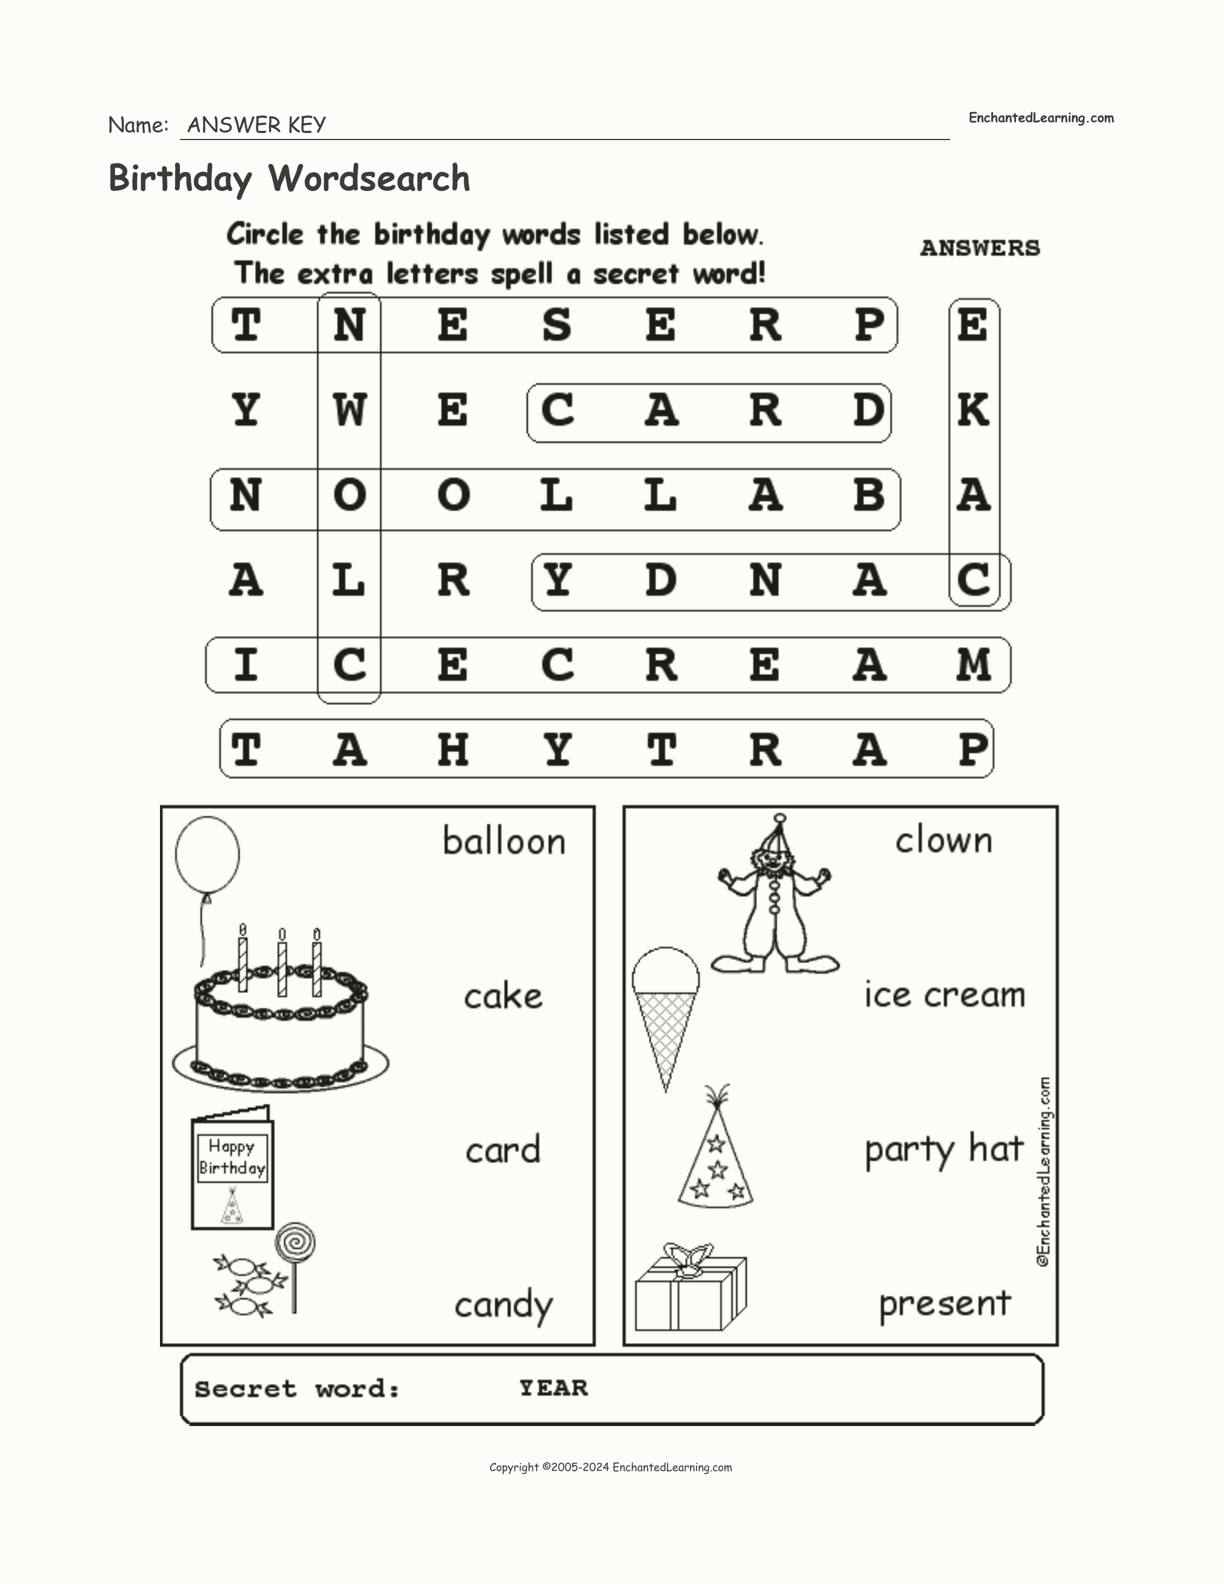 Birthday Wordsearch interactive worksheet page 2